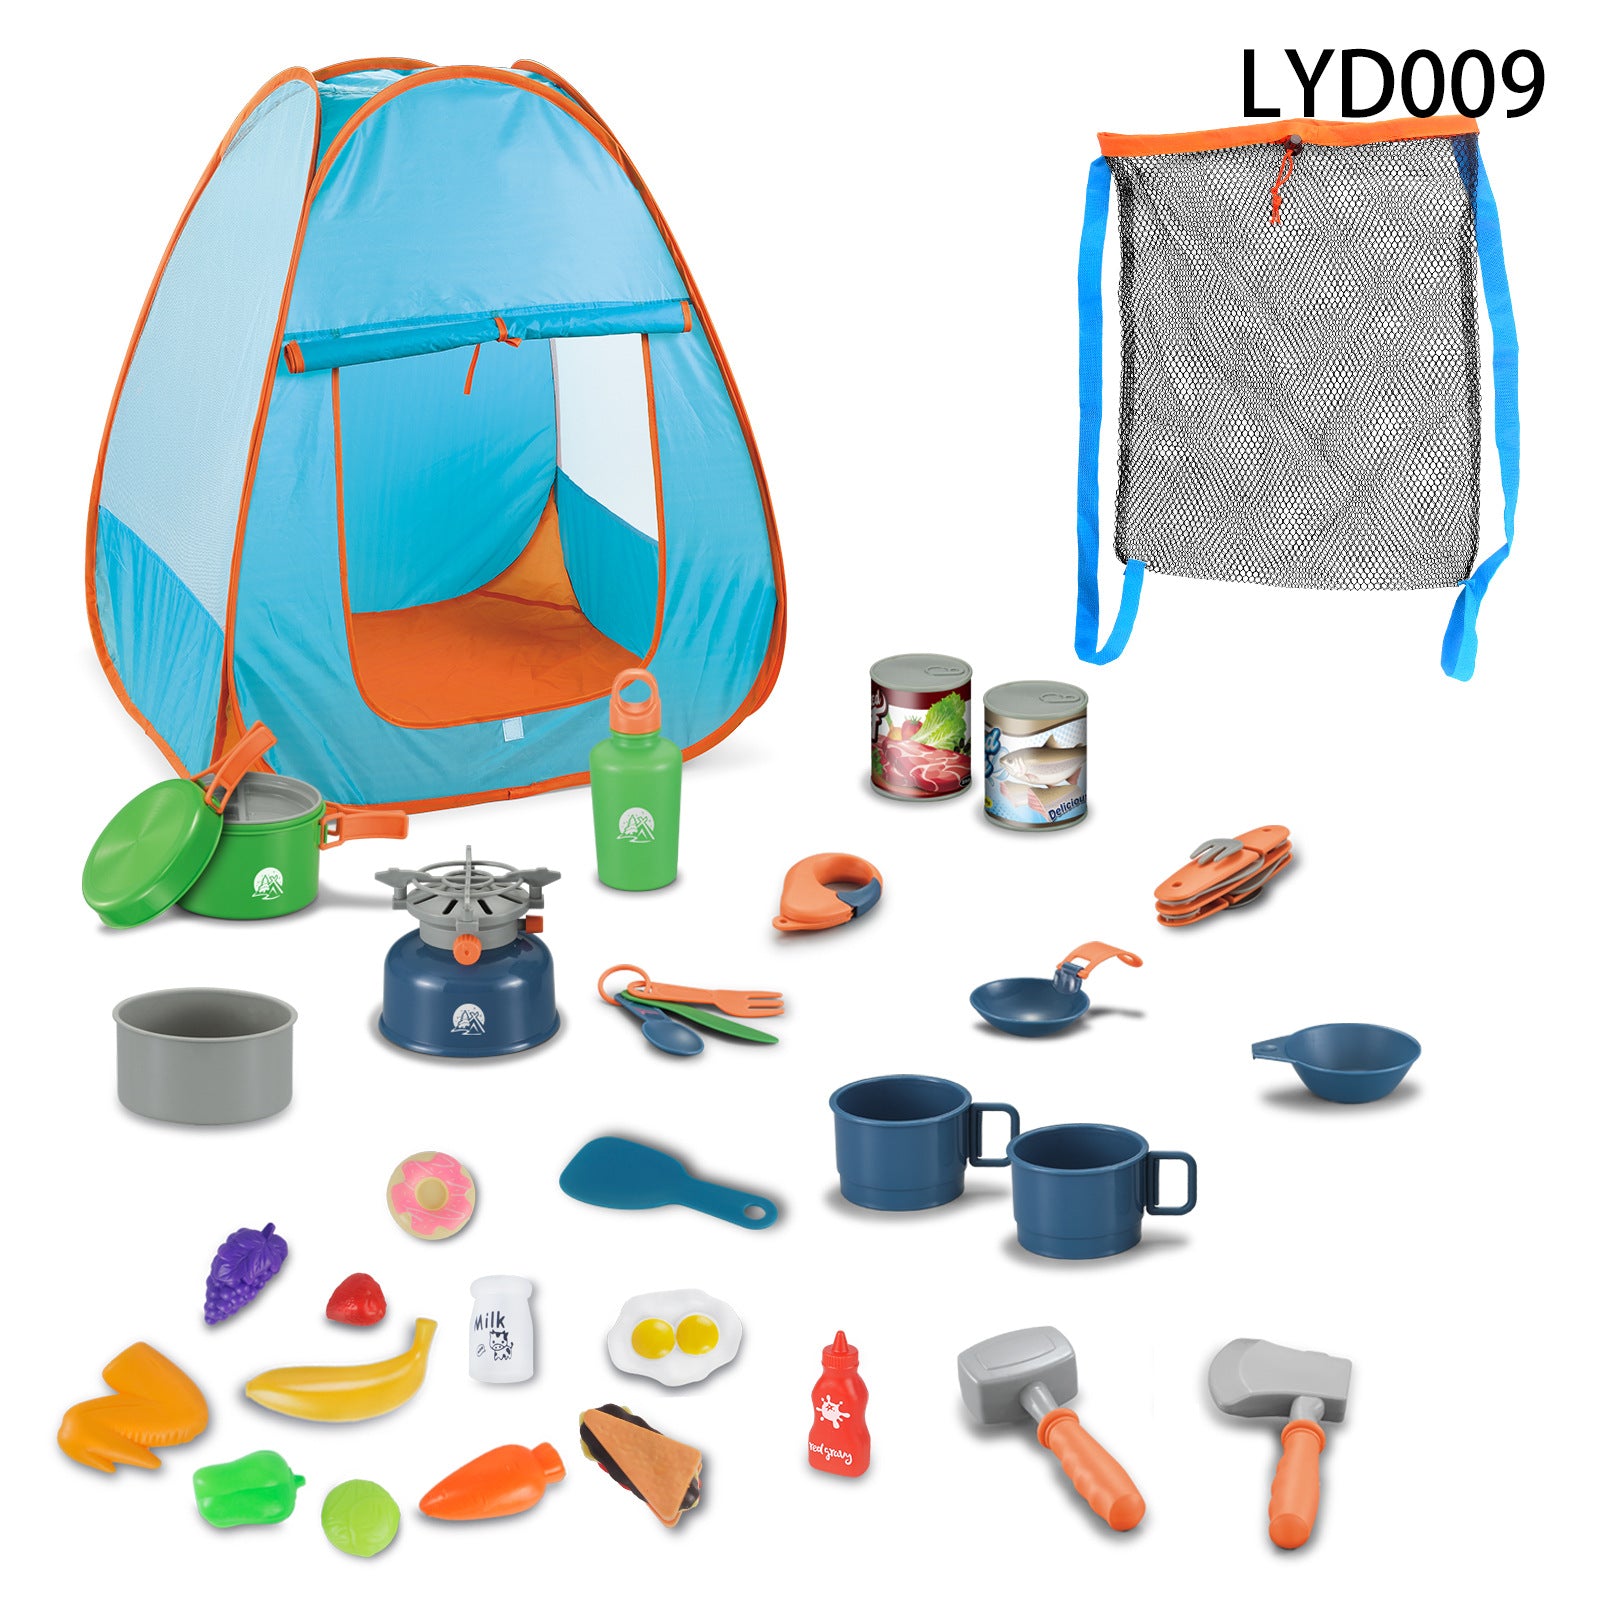 Children's Simulation Camping Tent Play House Toys Outdoor.